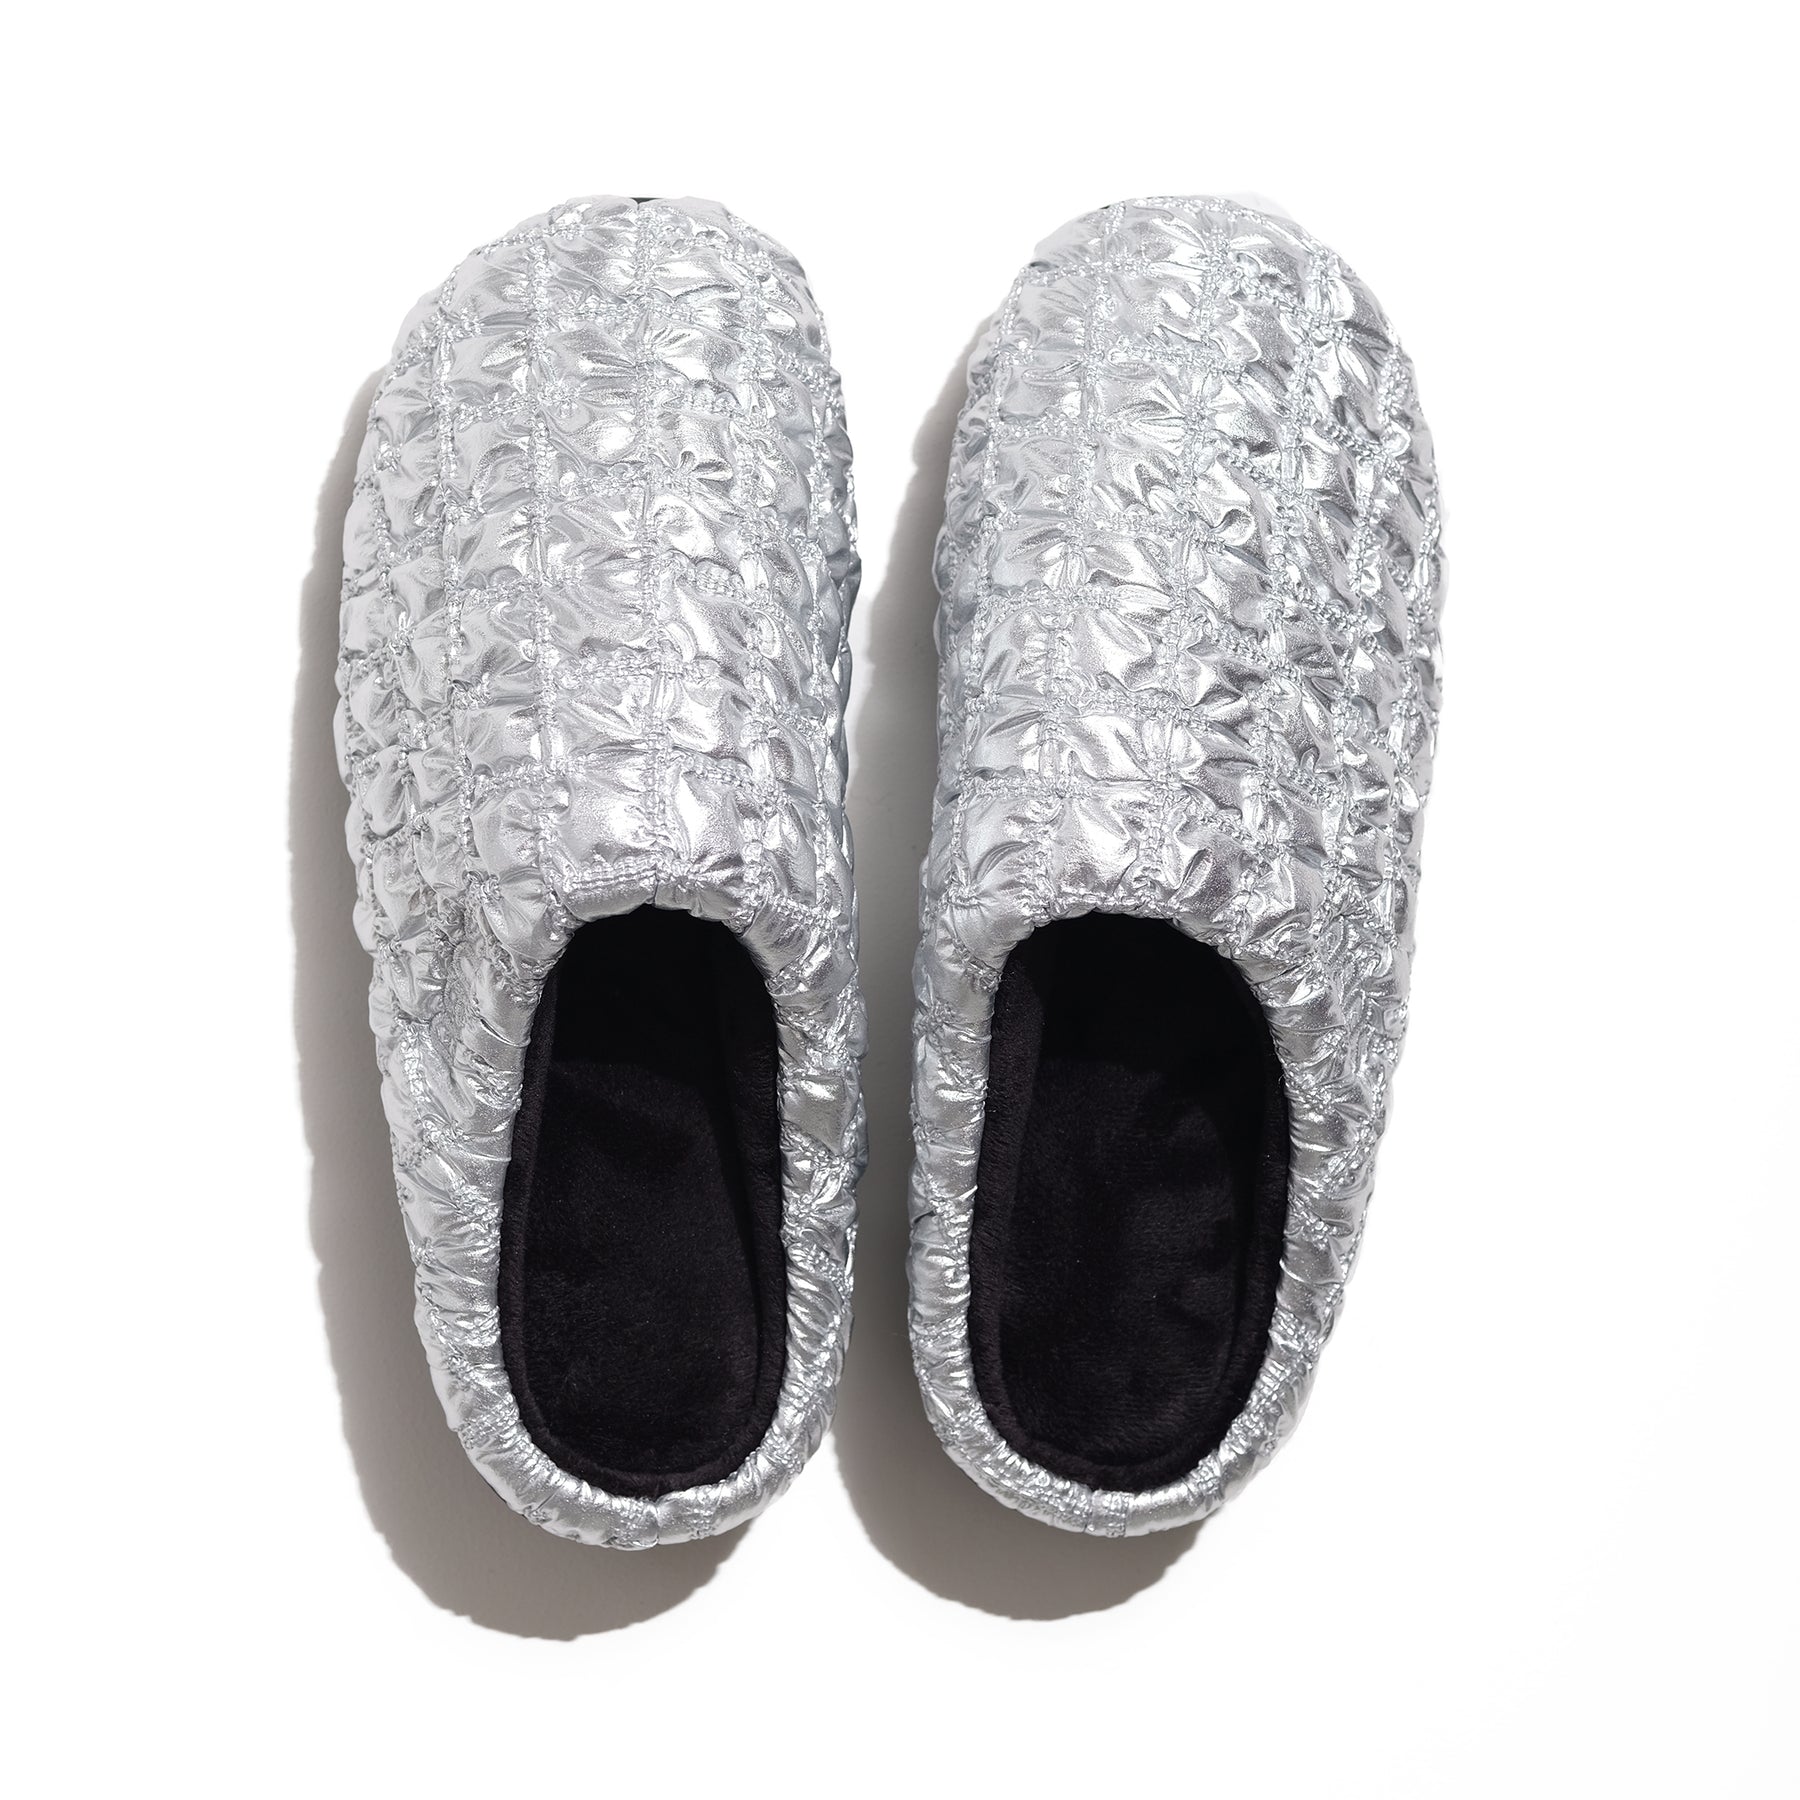 SUBU  Fall & Winter Concept Slippers - Bumpy Silver